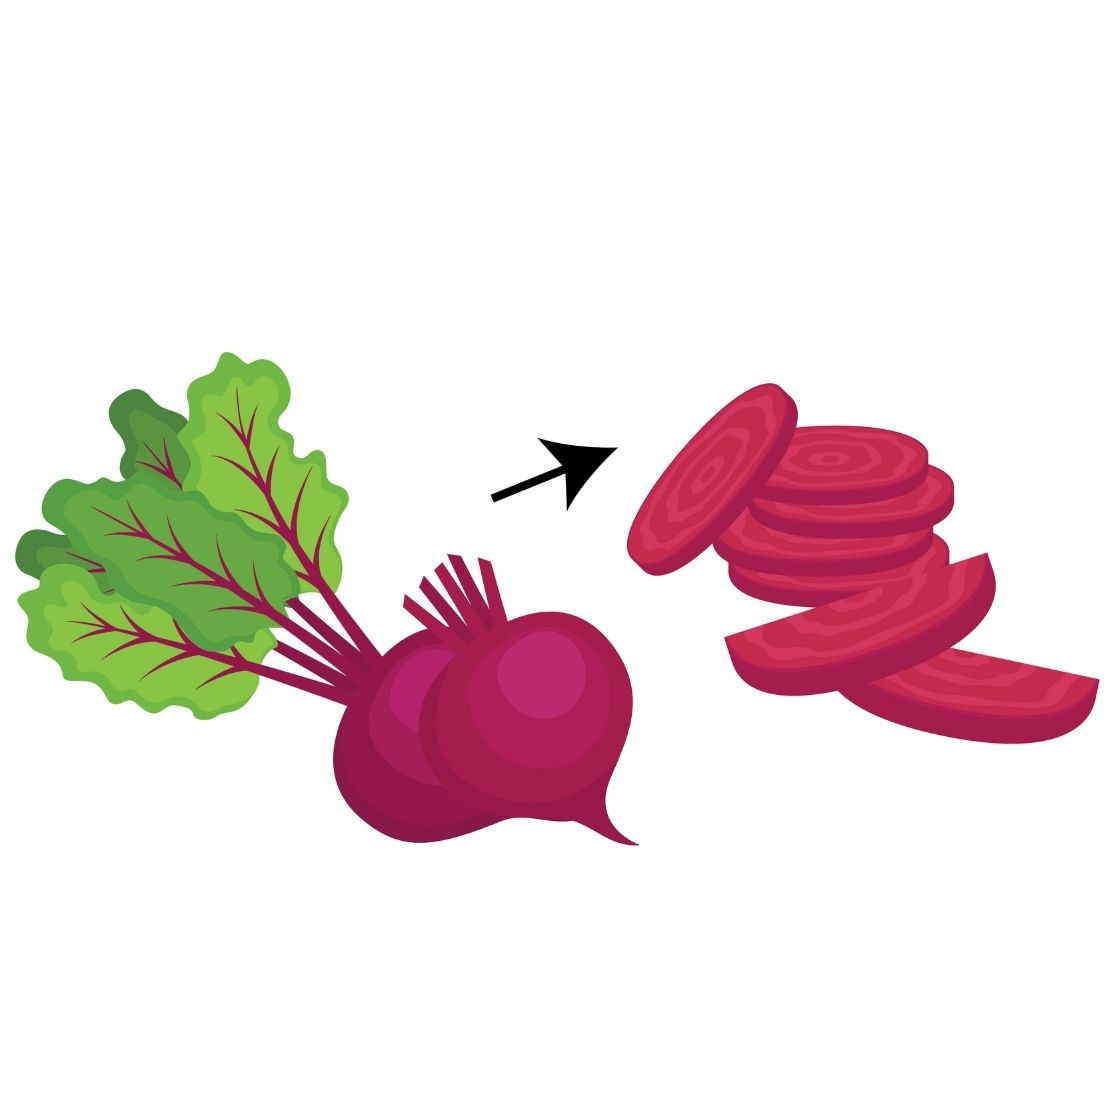 Wash your medium-sized beets after you must have cut the stems.